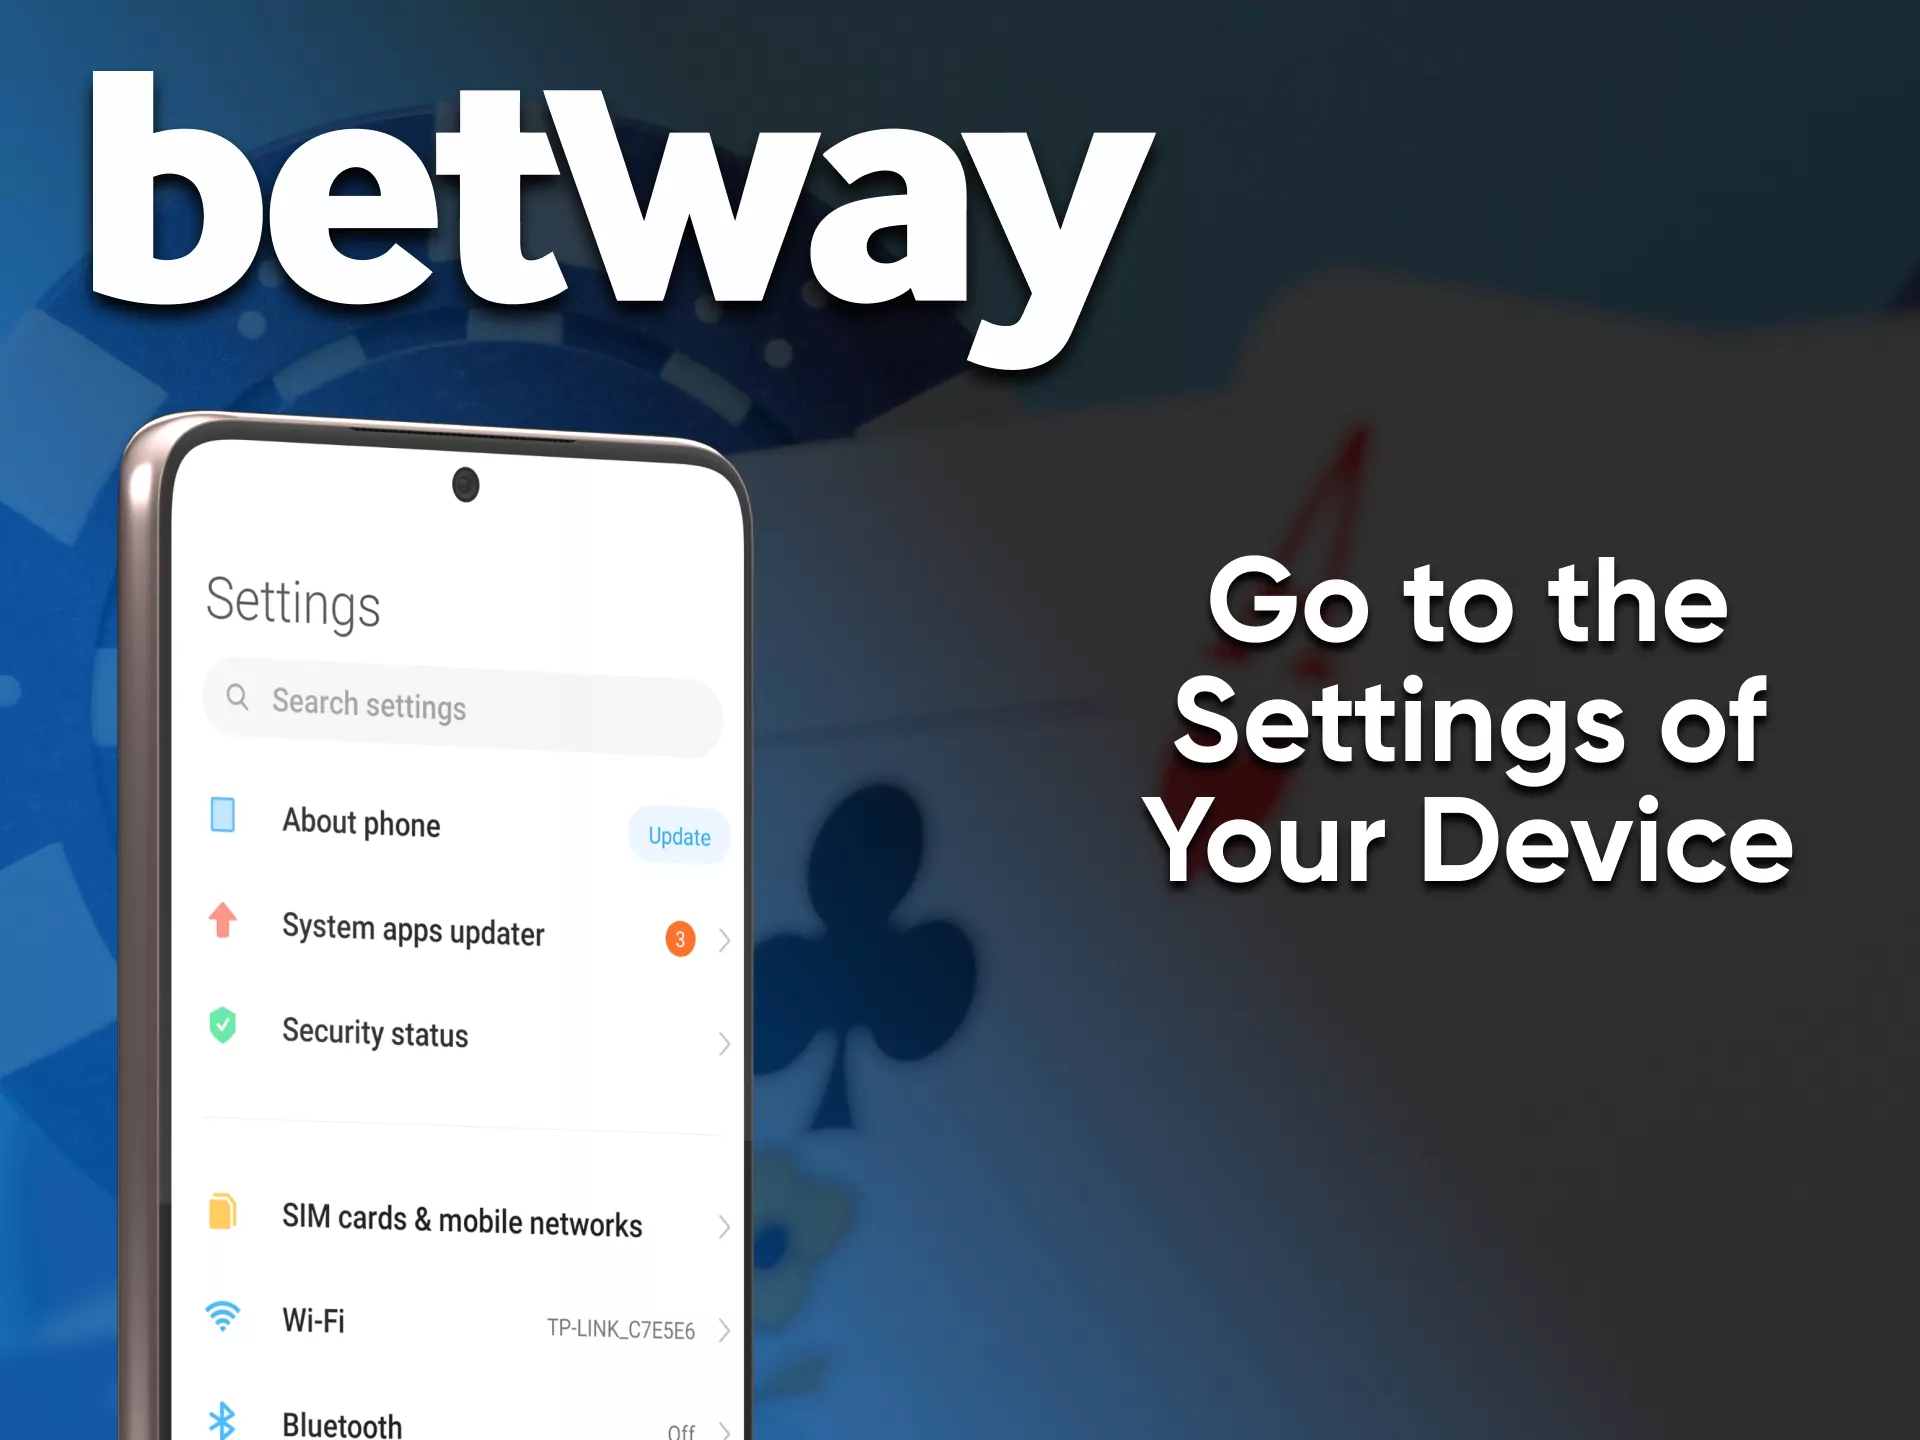 Permit an install the app Betway on your device.